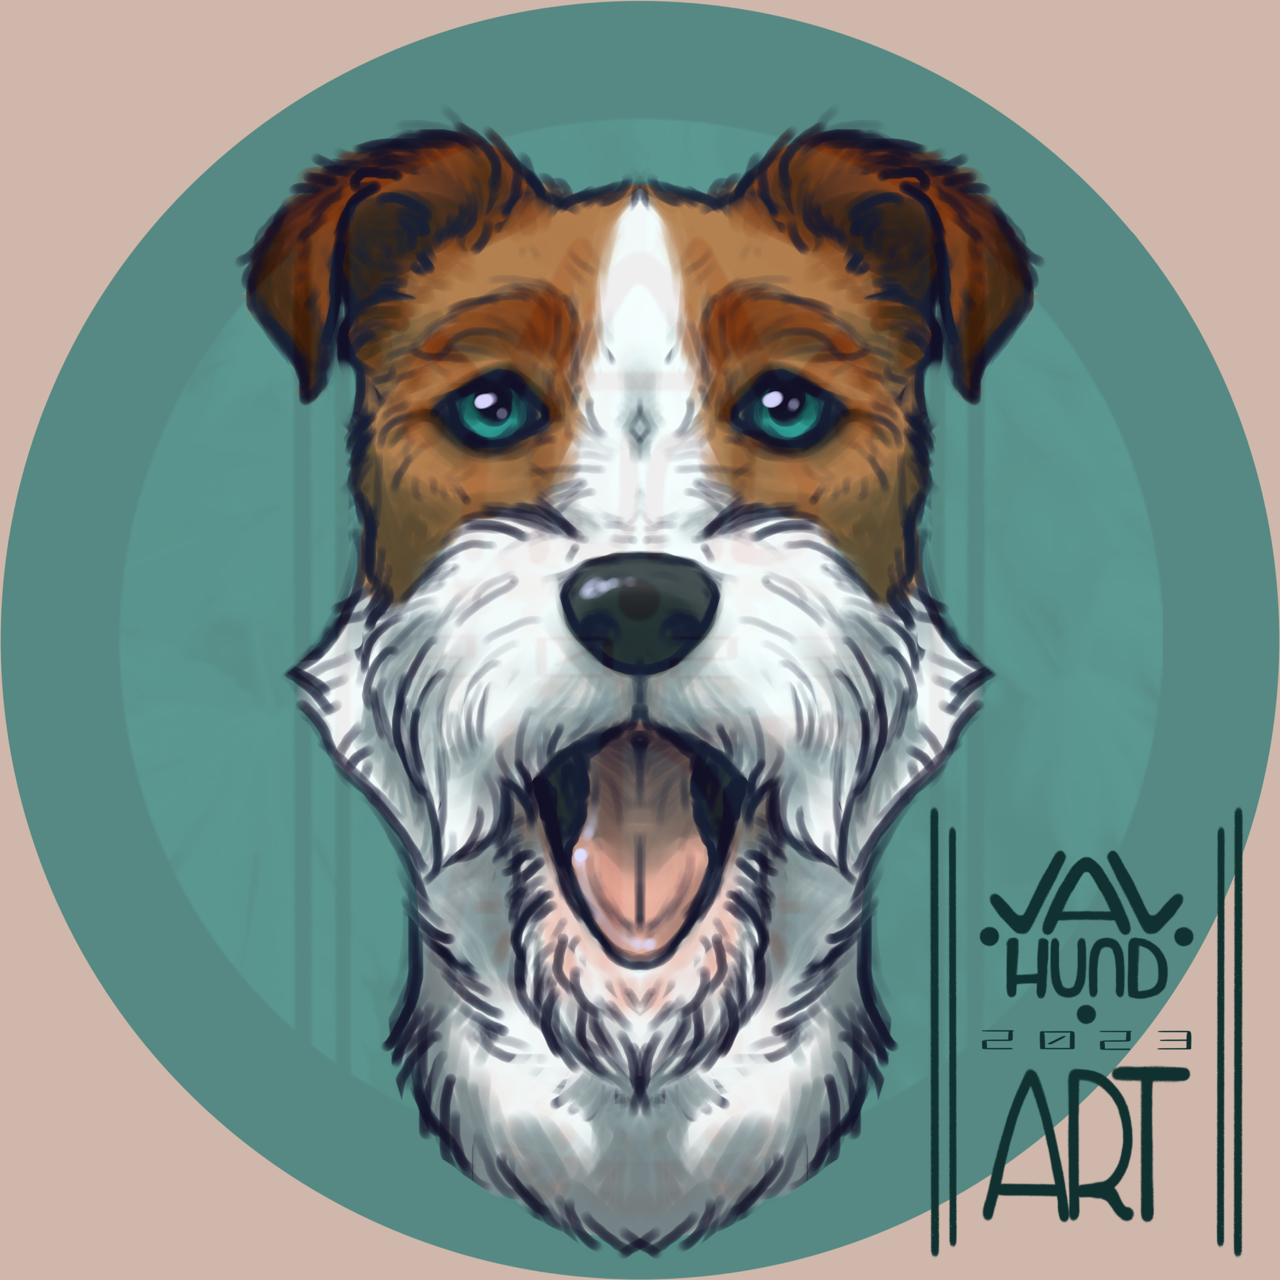 A frontal facing portrait of a fox terrier, mouth opened in a happy smile. The background consists of a green circle on a beige background. 